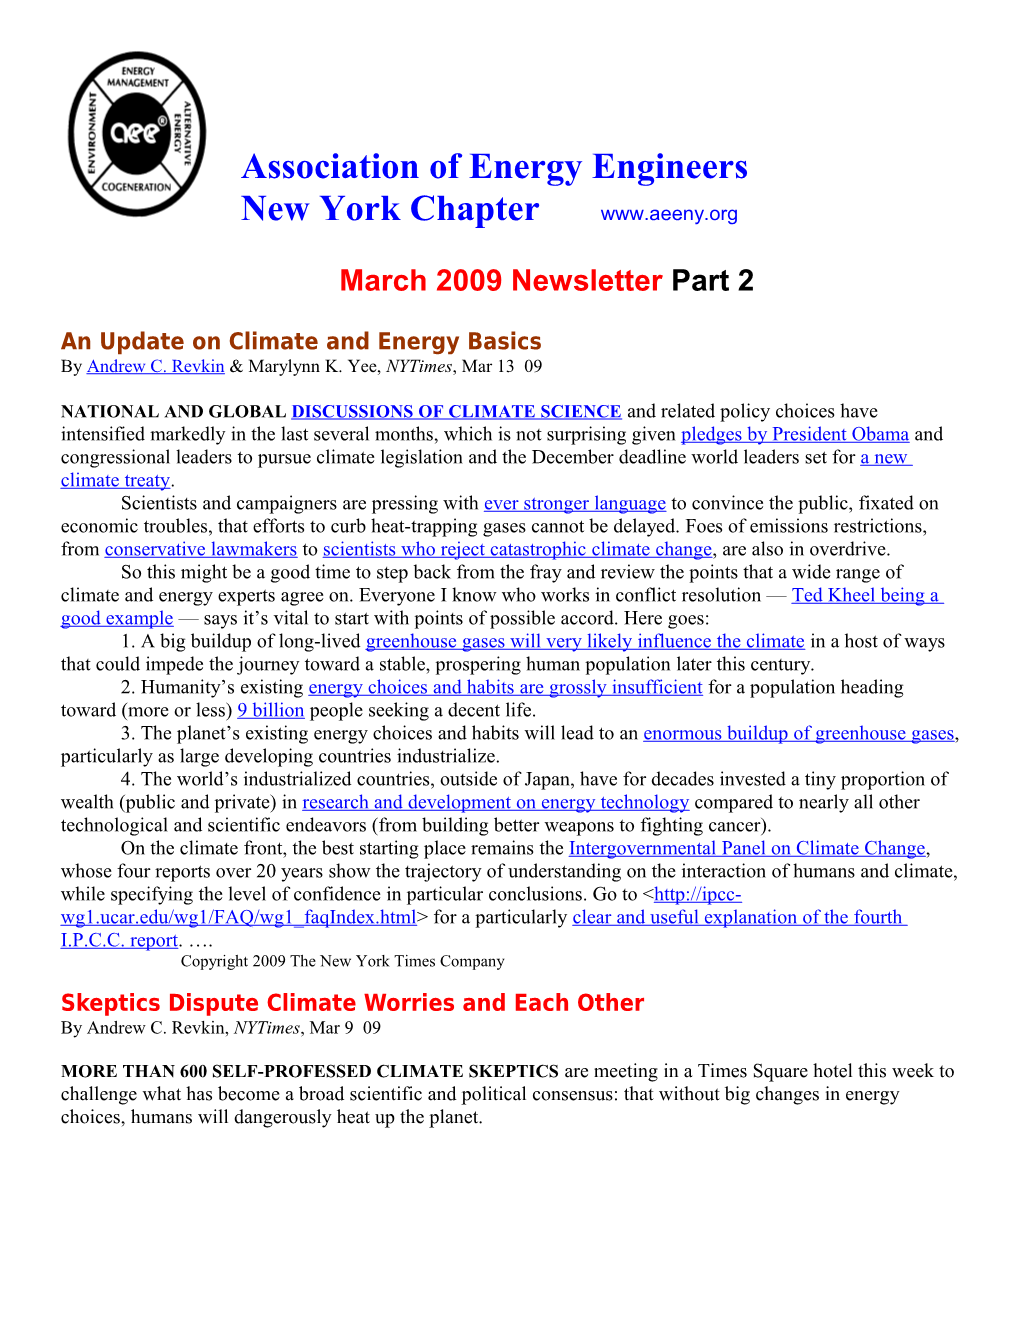 An Update on Climate and Energy Basics